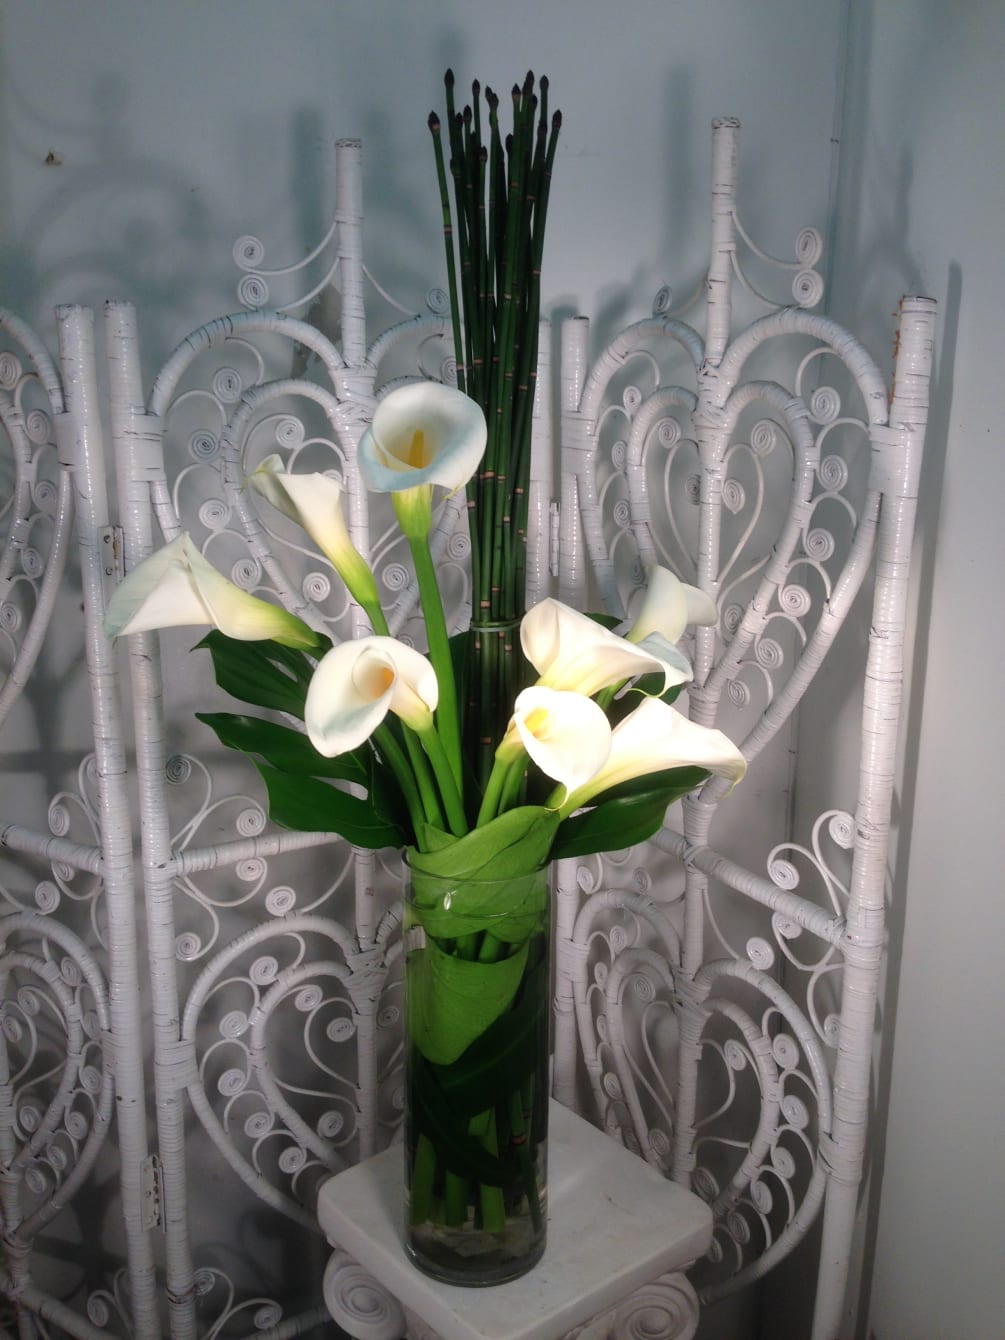 Tall, expressive and beautiful calla lilies arranged with unique greenery and horsetail